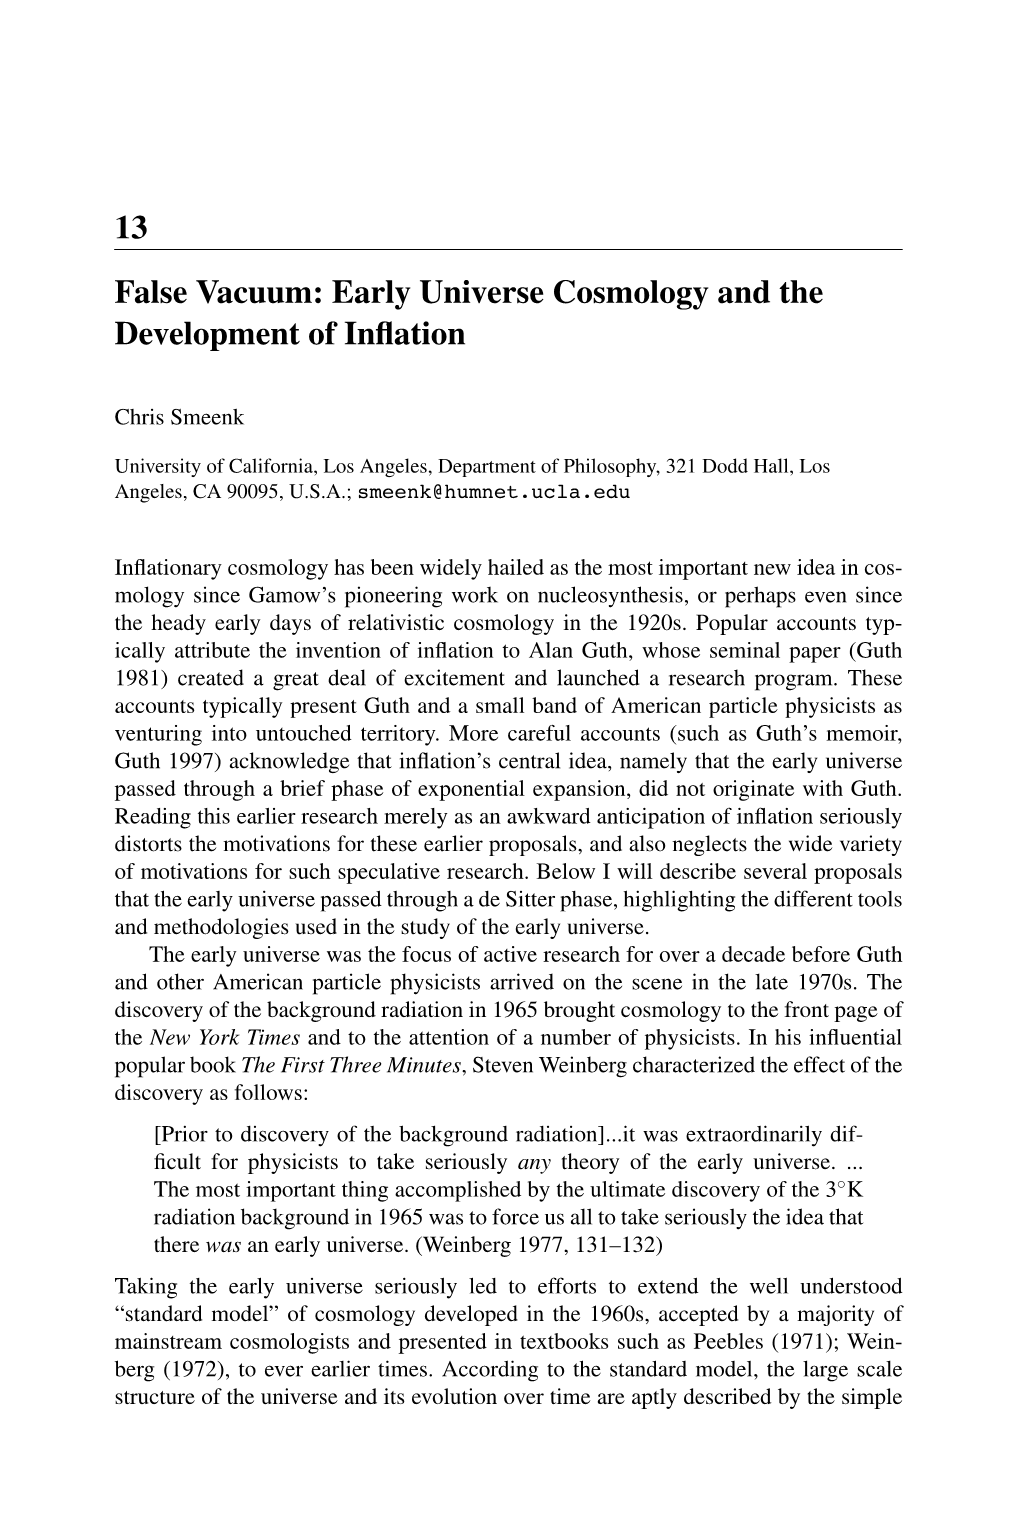 13 False Vacuum: Early Universe Cosmology and the Development of Inﬂation